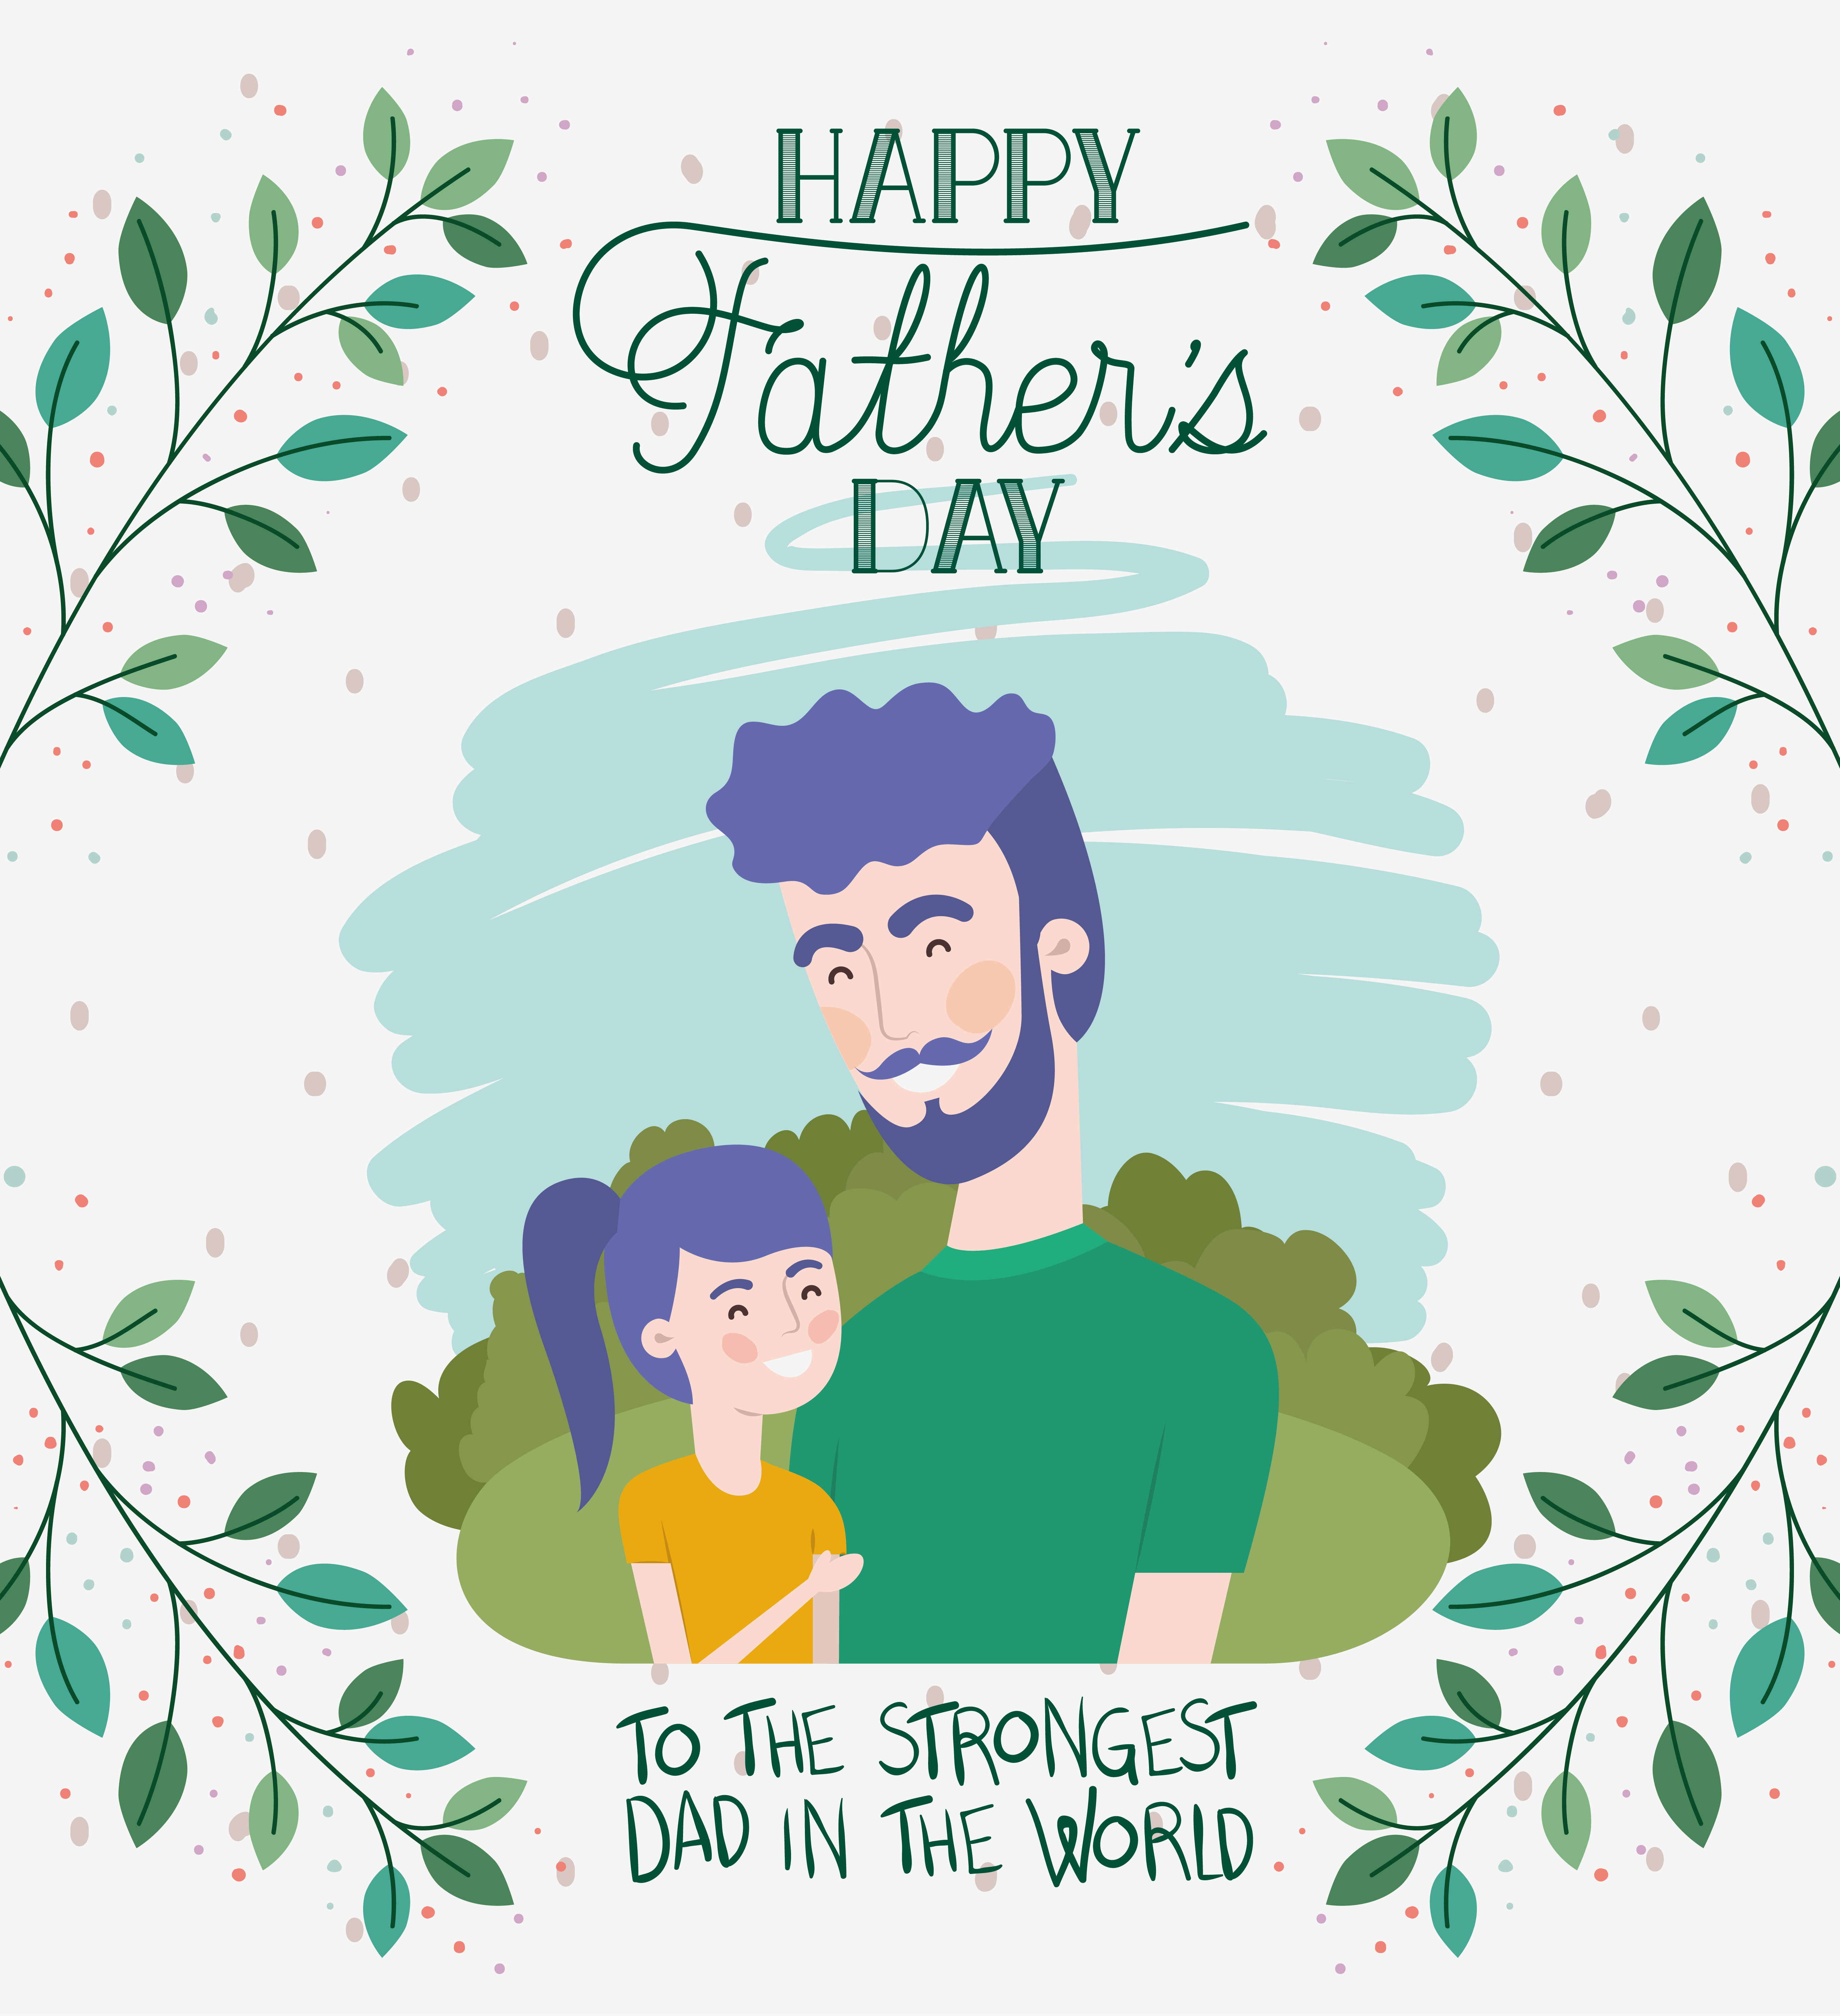 Happy Fathers Day Card With Foliage And Dad And Daughter